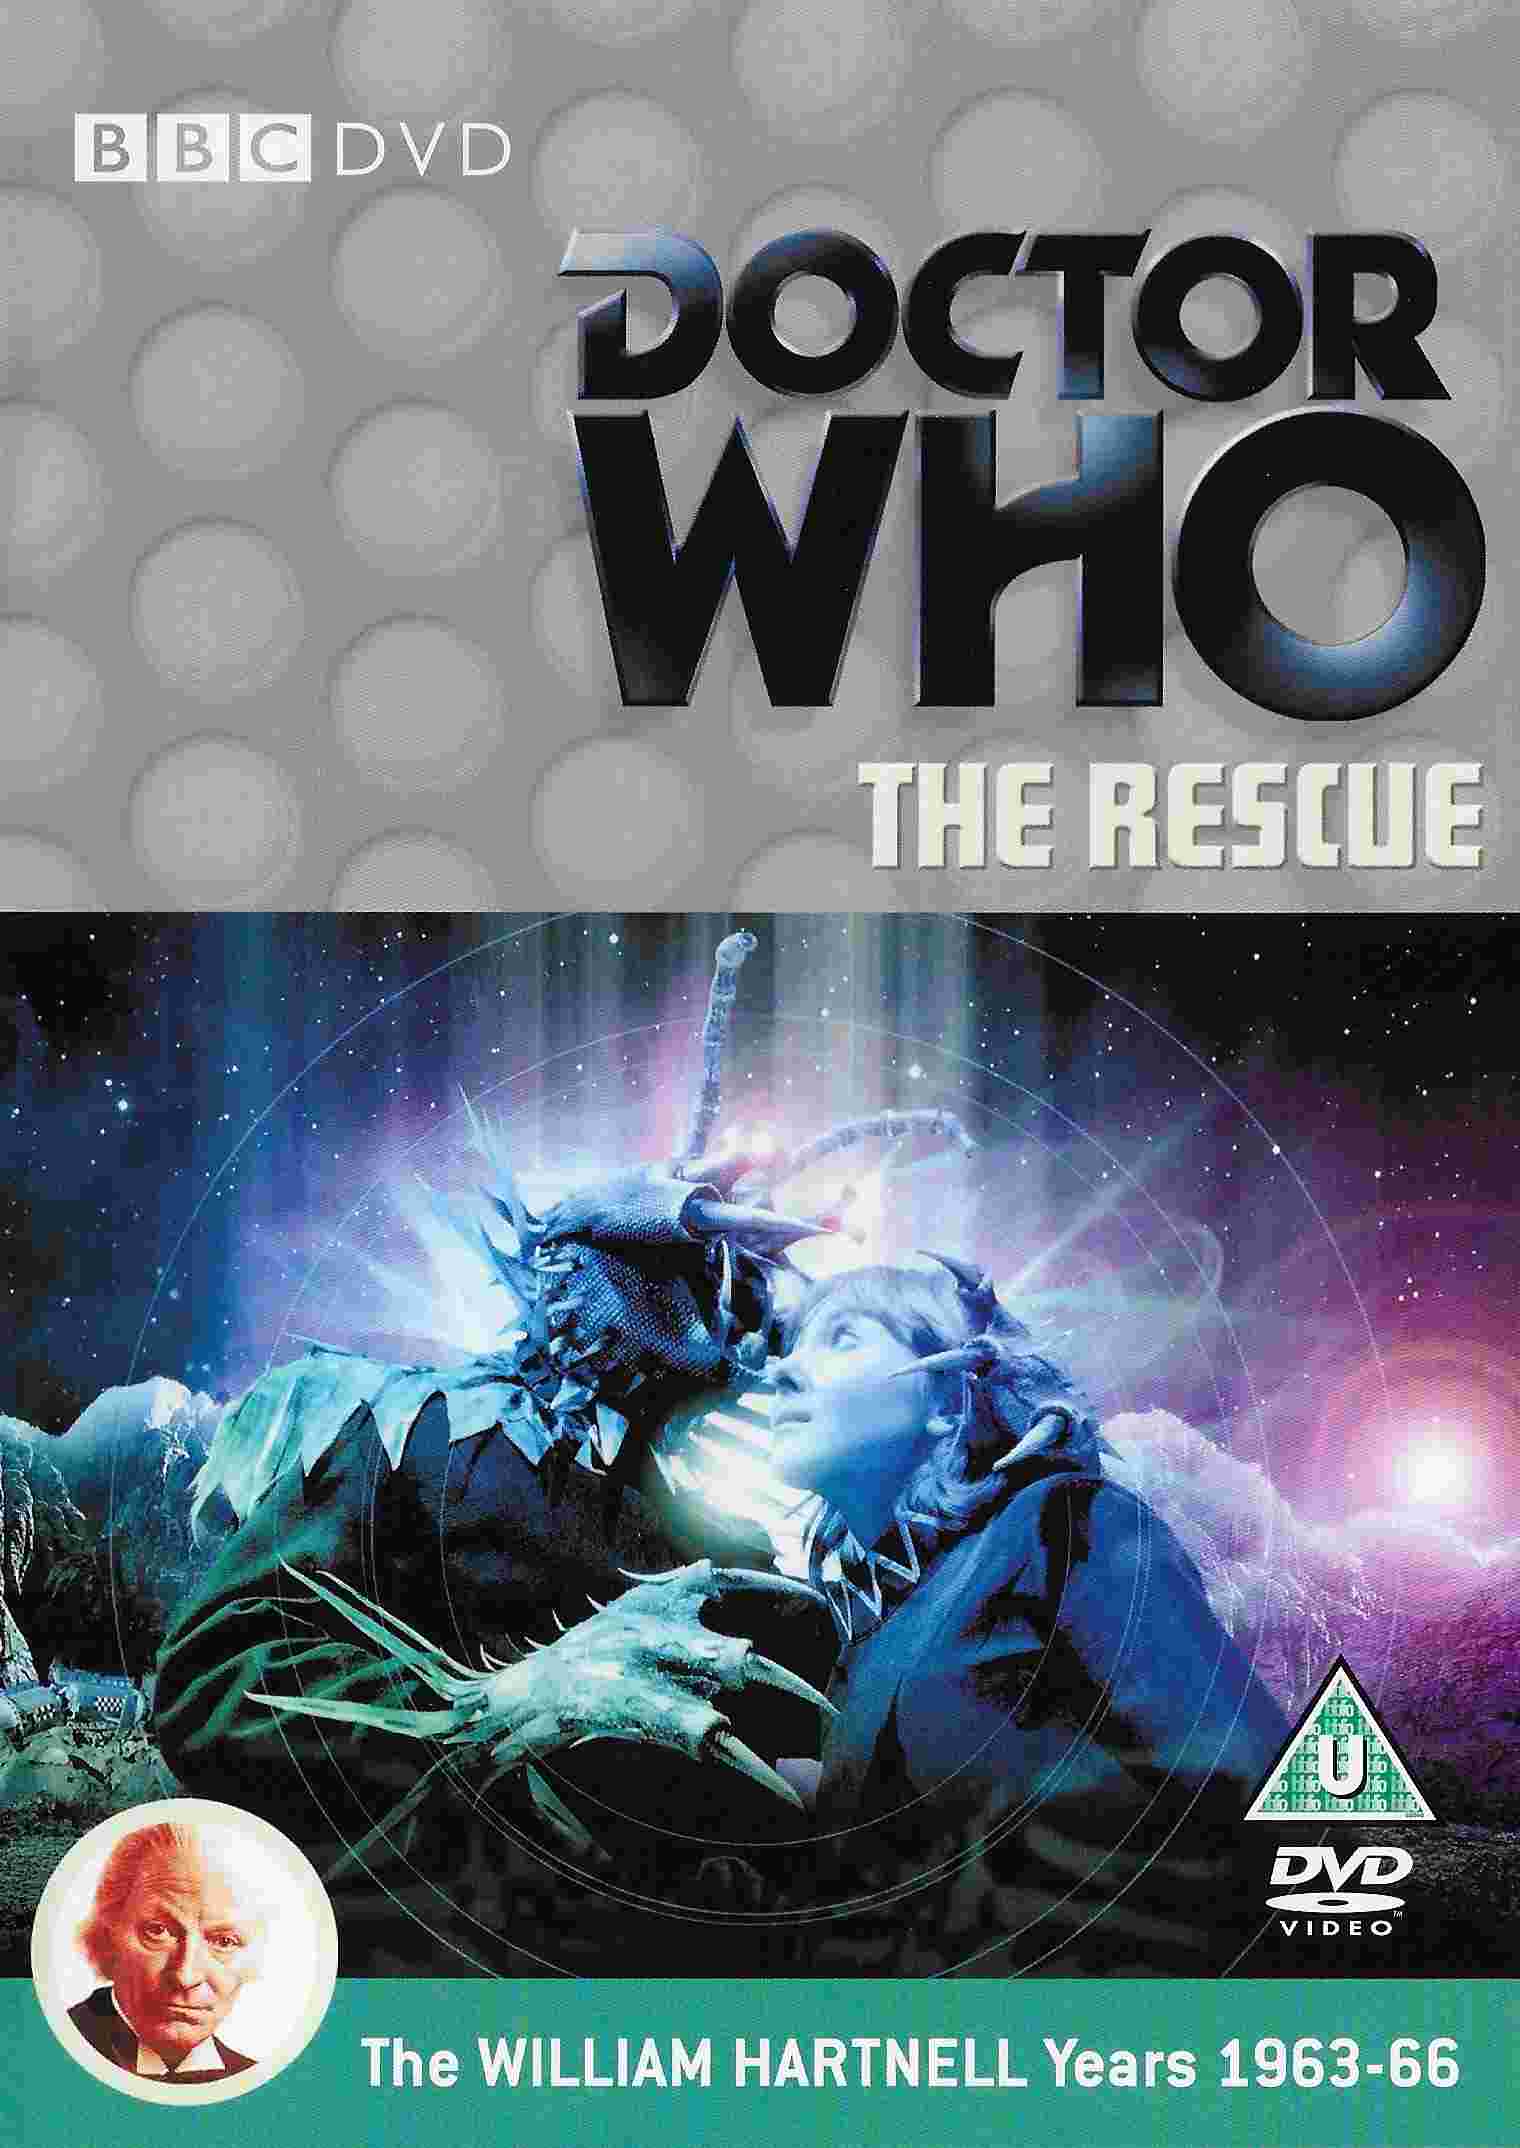 Picture of BBCDVD 2970 Doctor Who - The rescue by artist Terry Nation from the BBC records and Tapes library